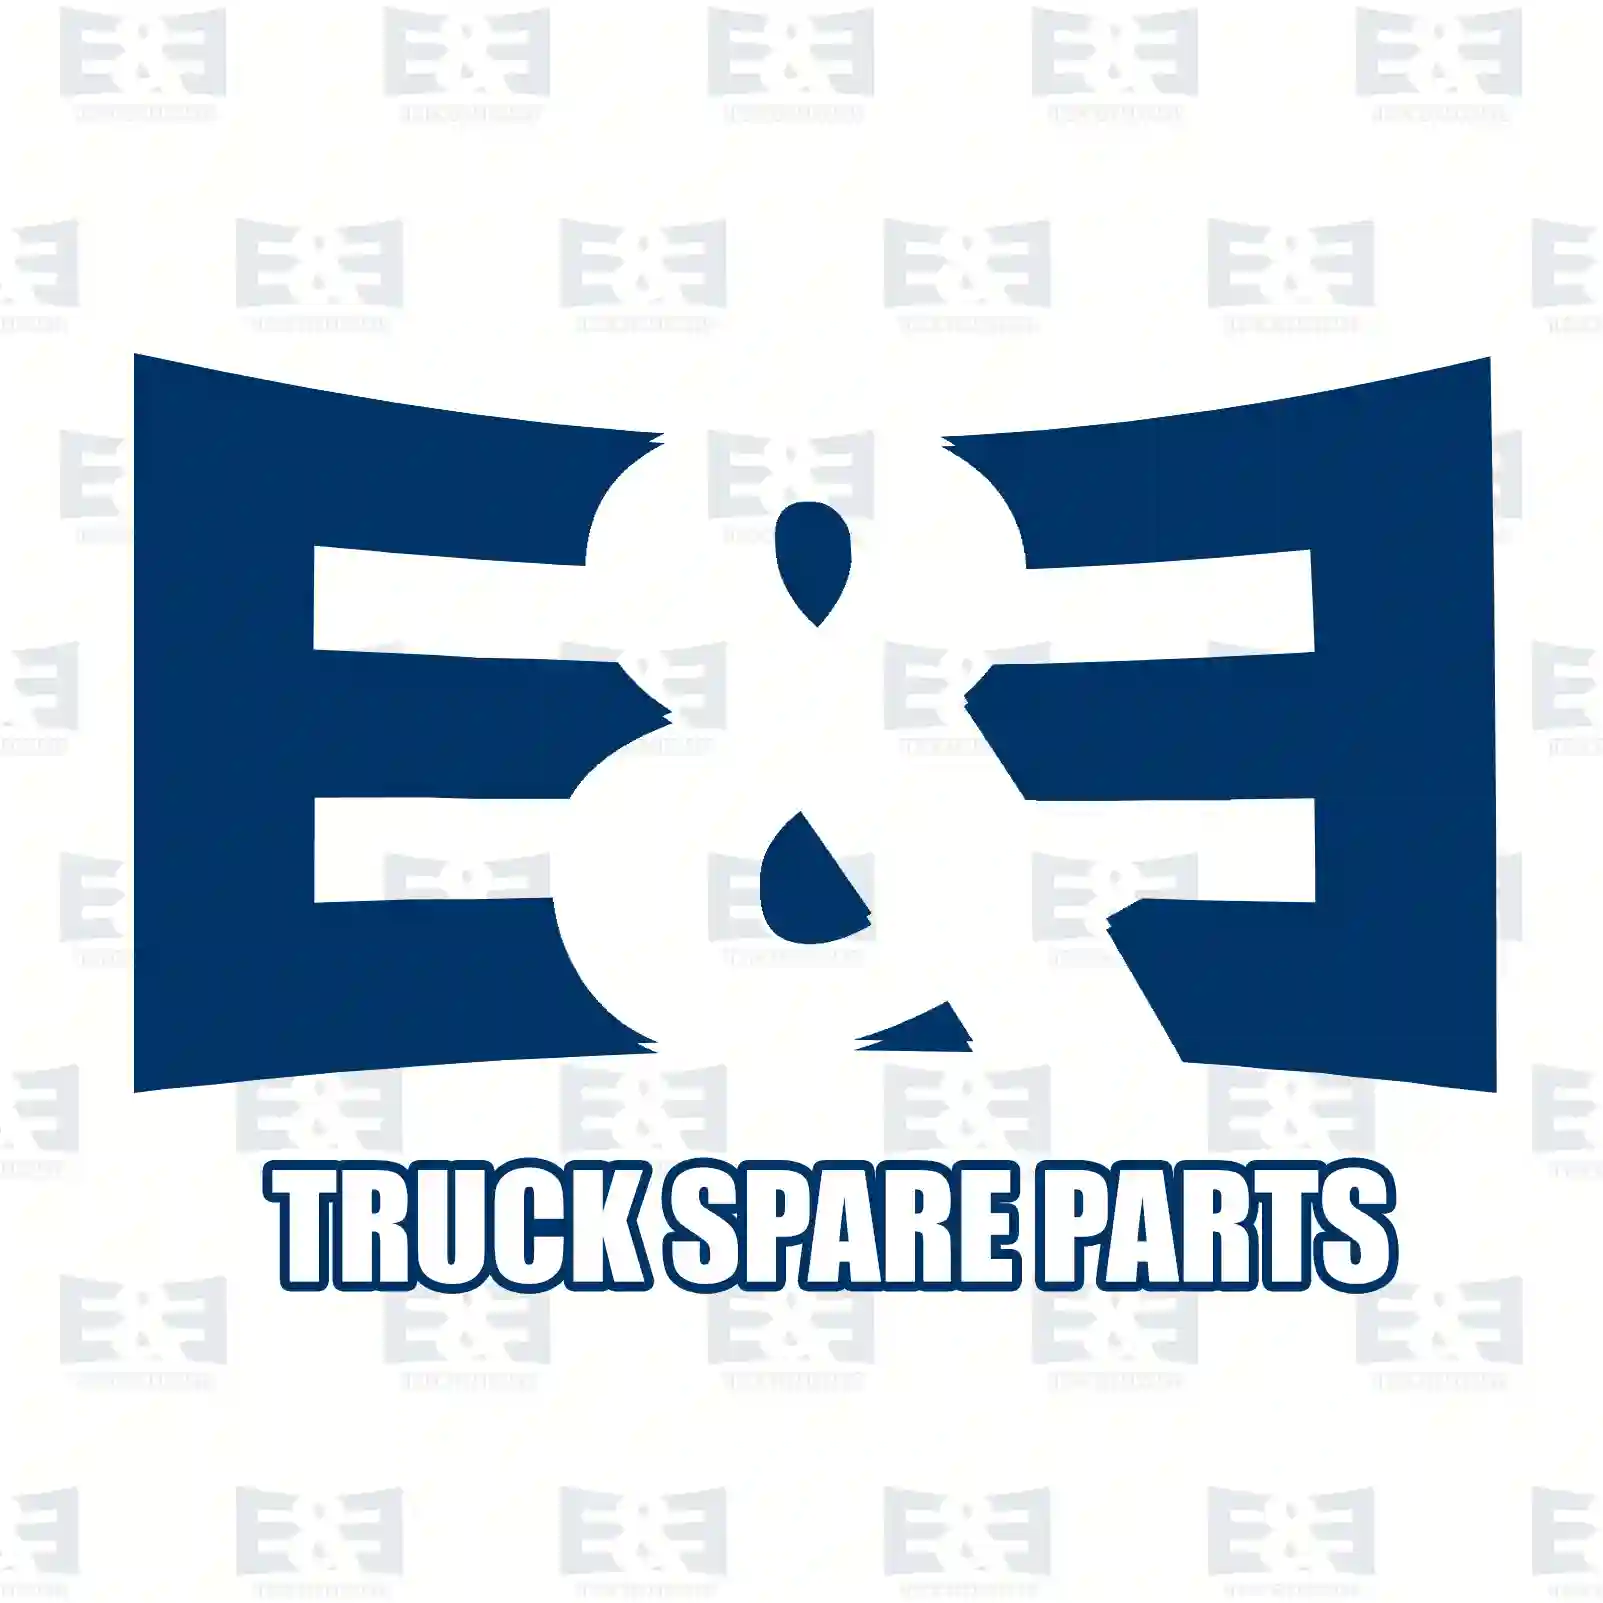 King pin kit, without cover plate, 2E2279689, 3096234 ||  2E2279689 E&E Truck Spare Parts | Truck Spare Parts, Auotomotive Spare Parts King pin kit, without cover plate, 2E2279689, 3096234 ||  2E2279689 E&E Truck Spare Parts | Truck Spare Parts, Auotomotive Spare Parts